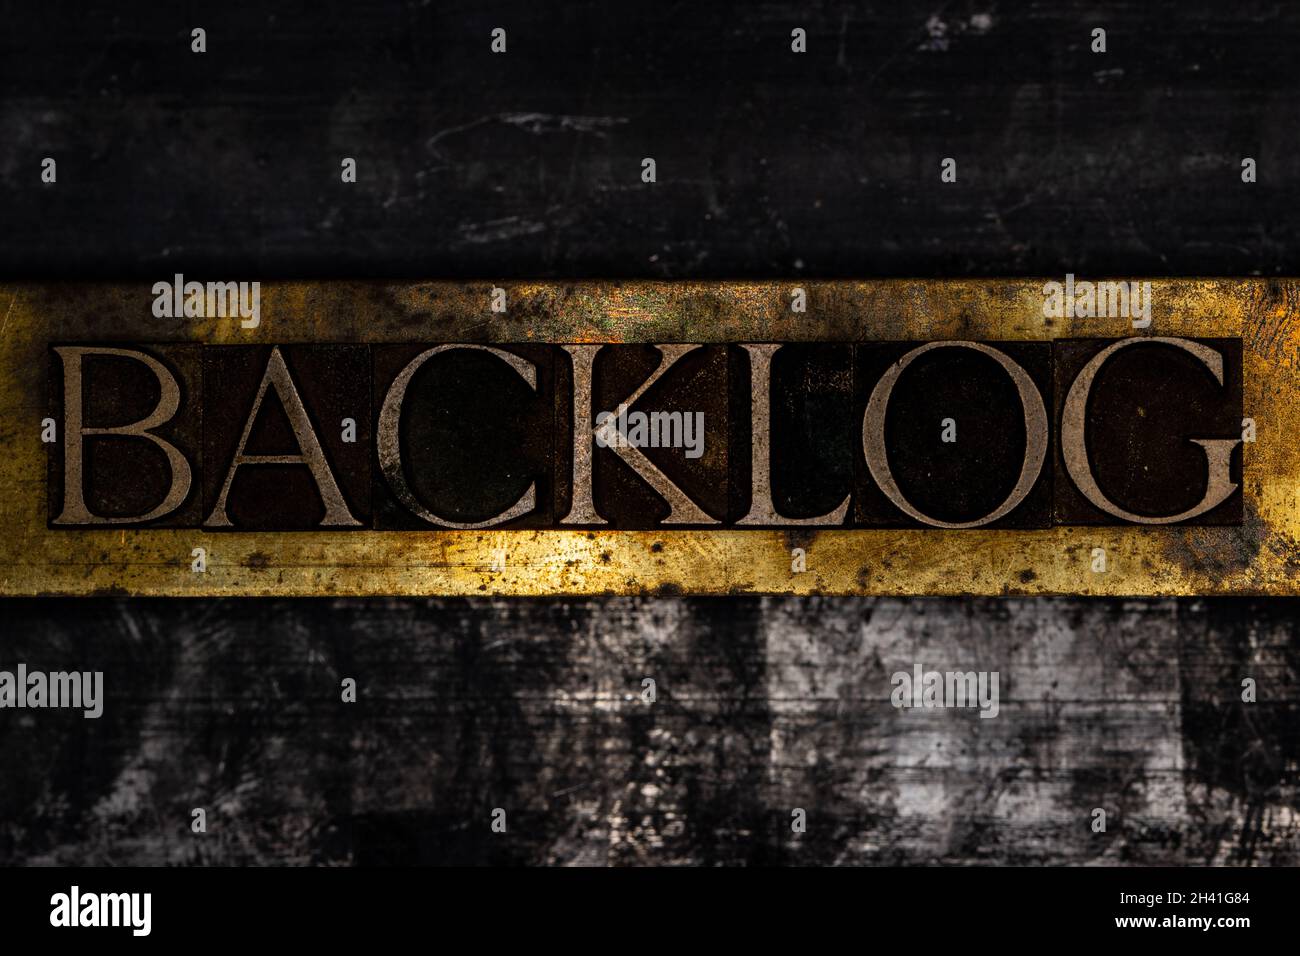 Backlog text on textured grunge copper and vintage gold background Stock Photo